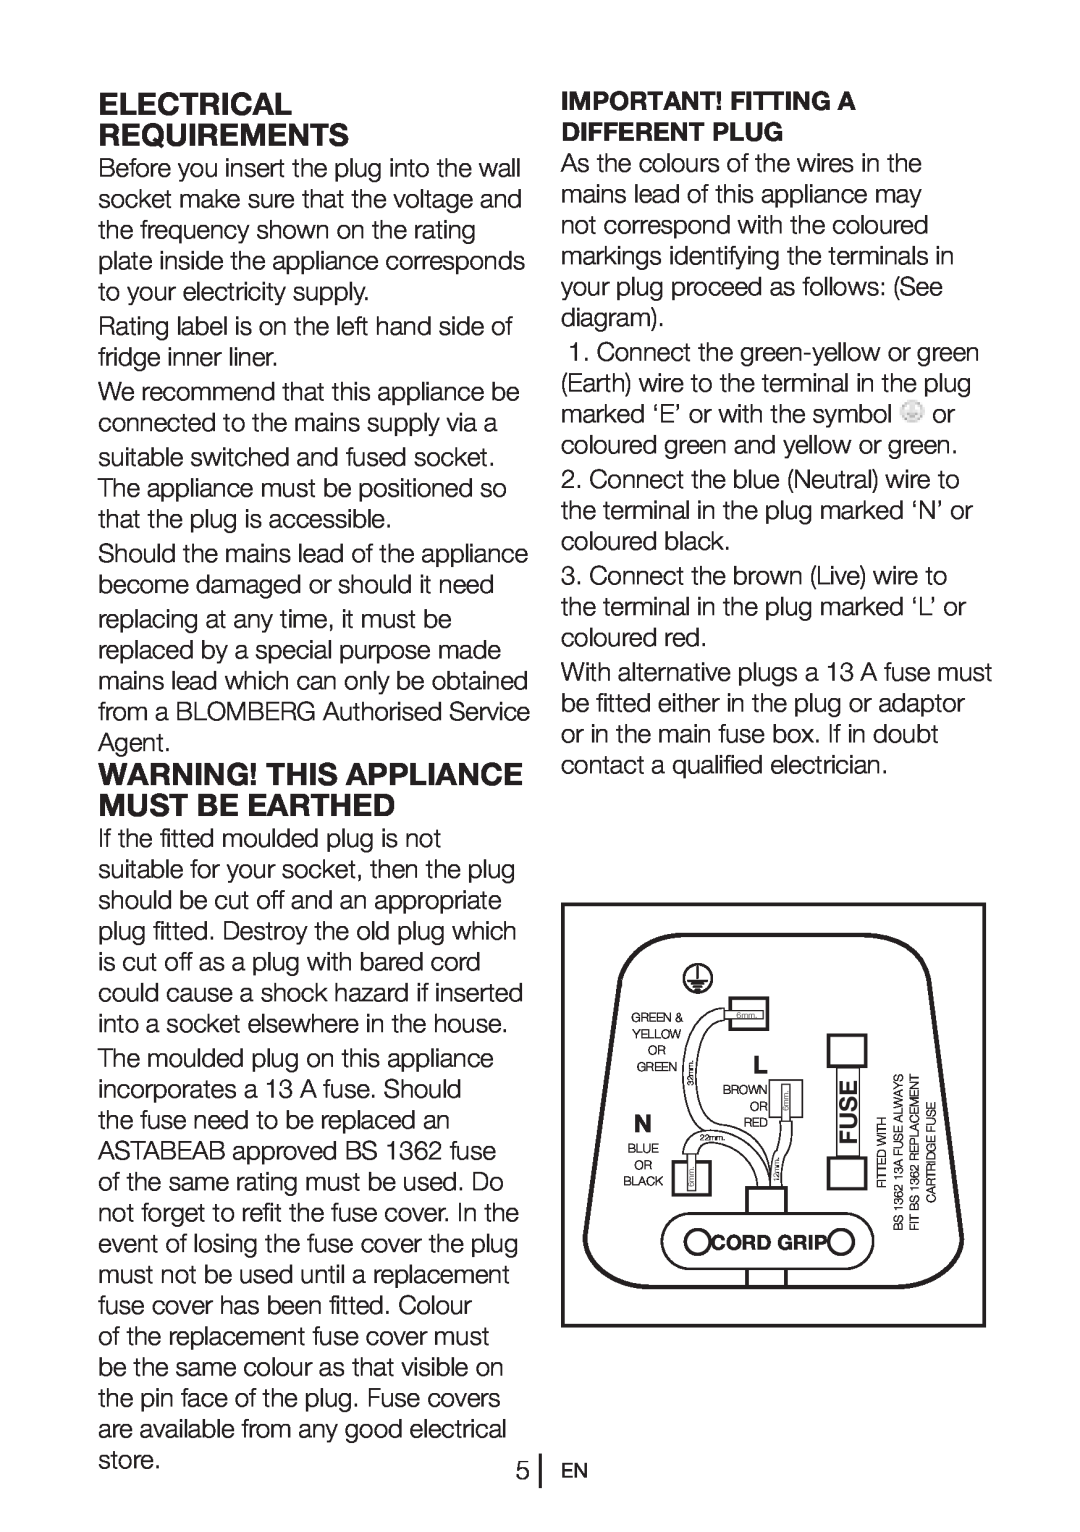 Blomberg KNM1551i Electrical Requirements, Warning! This Appliance Must Be Earthed, Important! Fitting A Different Plug 